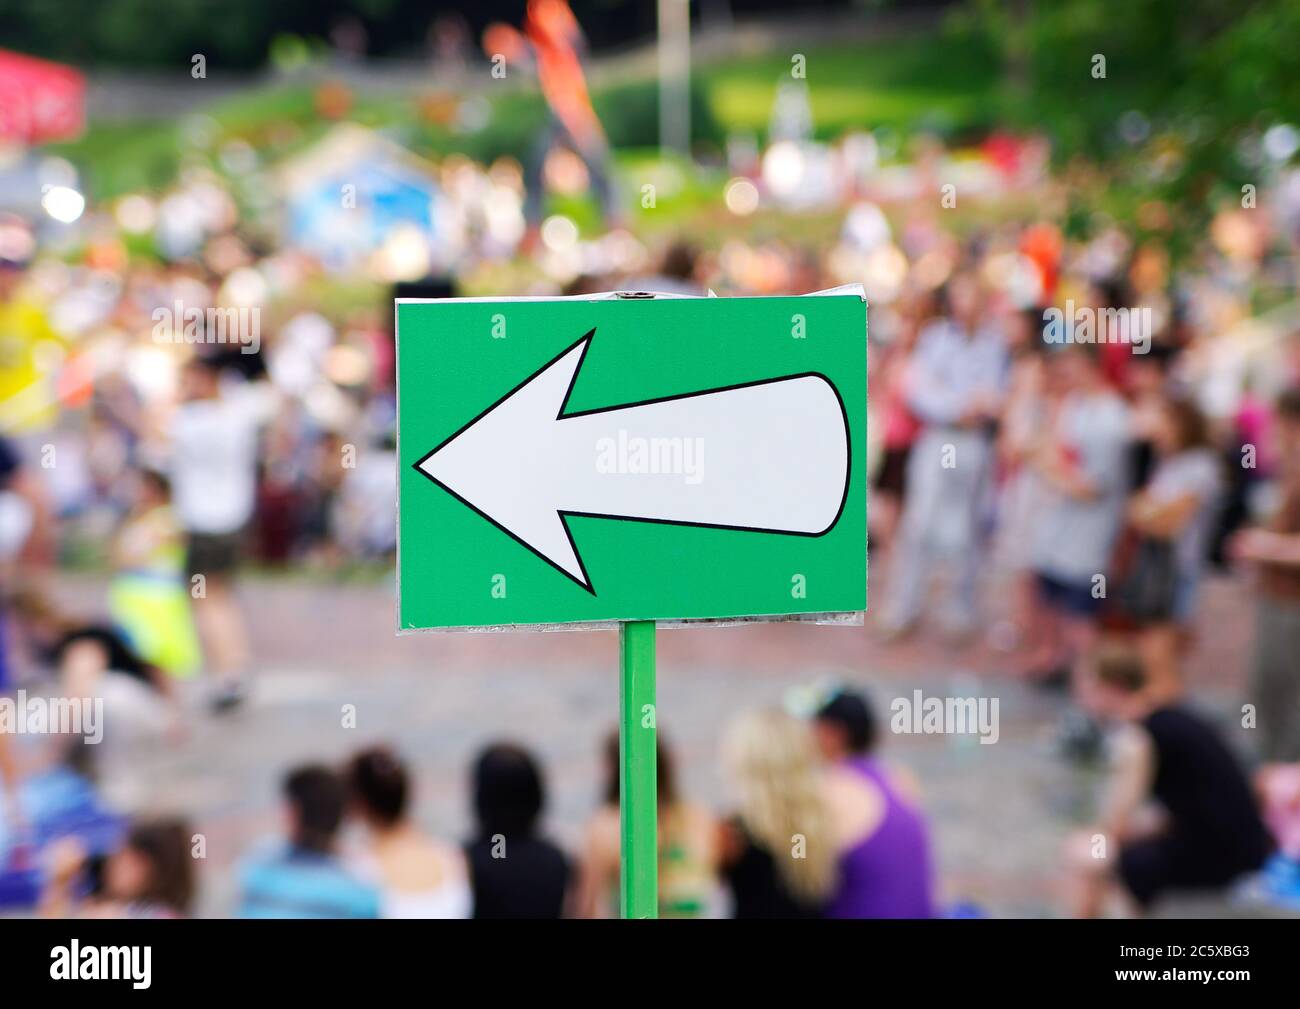 Clear white arrow direction sign against blurred crowd Stock Photo